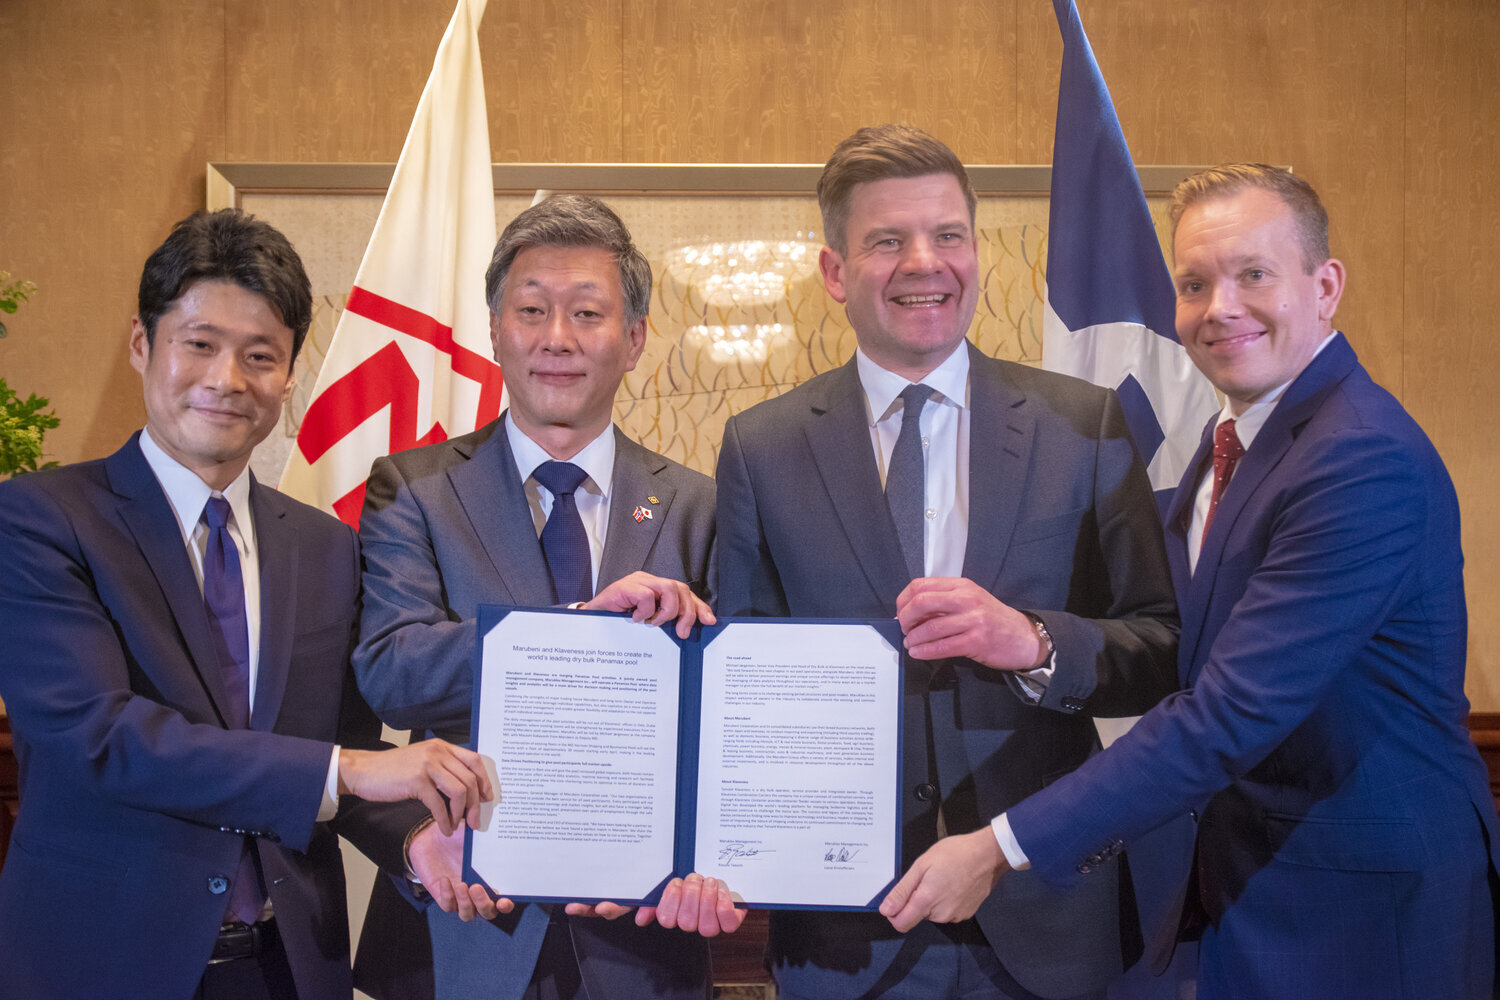 From left: Masashi Kobayashi, Department Manager of the Ship Department of Marubeni Corporation, Kosuke Takechi, COO of Marubeni Corporation, Lasse Kristoffersen CEO and President of Klaveness and Michael Jørgensen, Head of Dry Bulk at Klaveness.